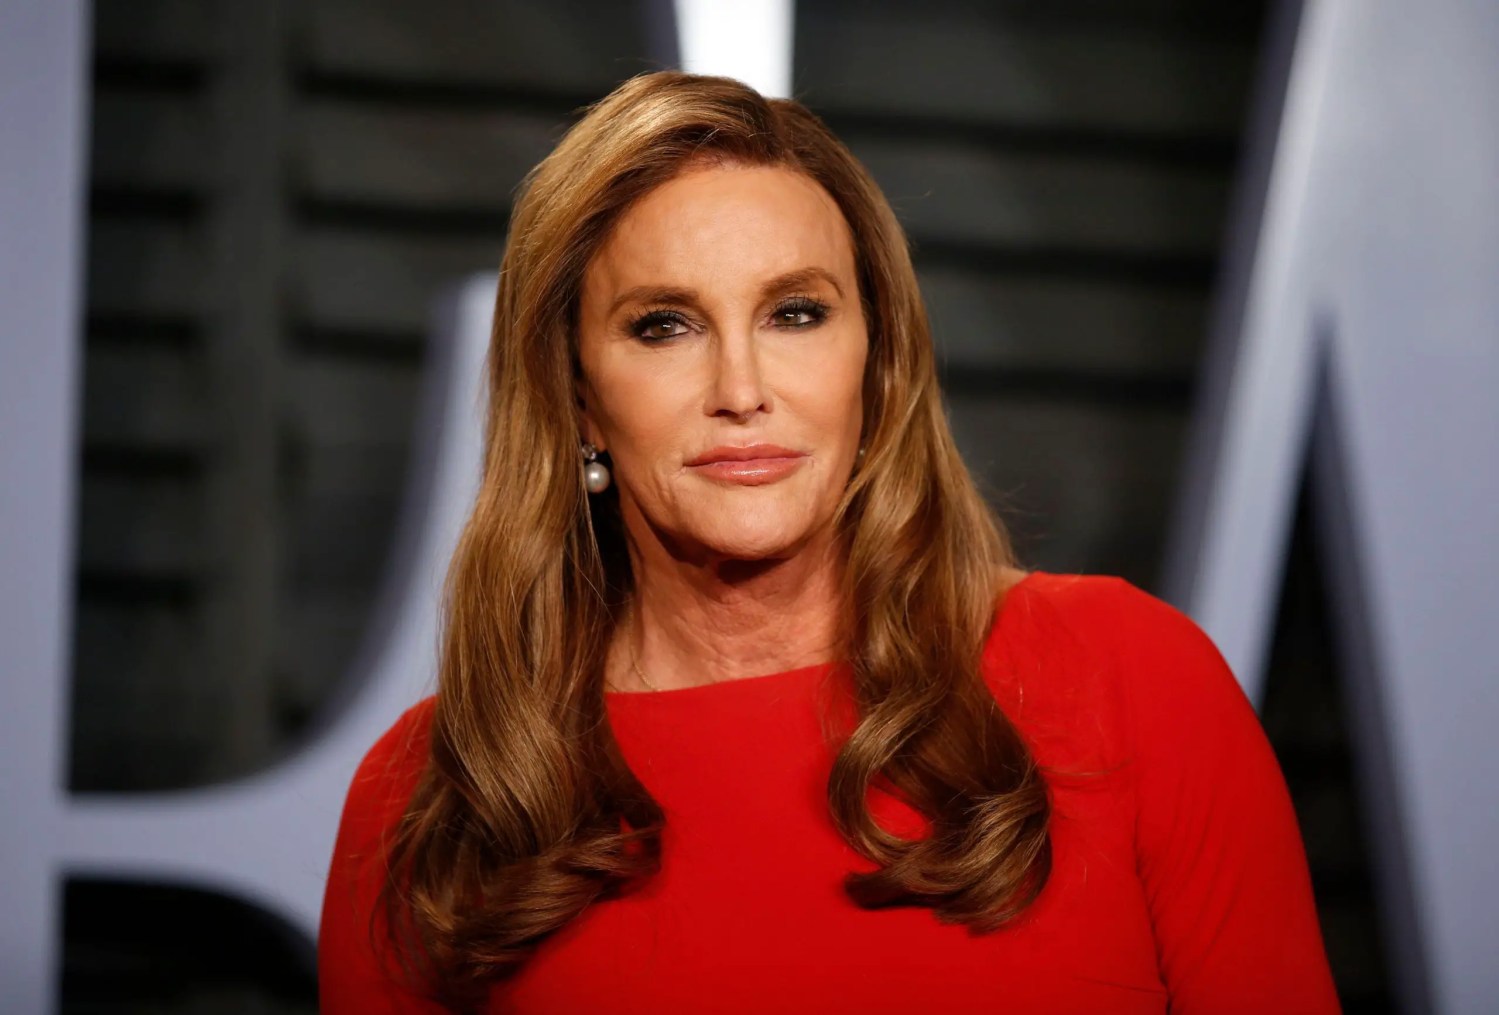 Caitlyn Jenner's Blunt Two-Word Response To O.J. Simpson's Death